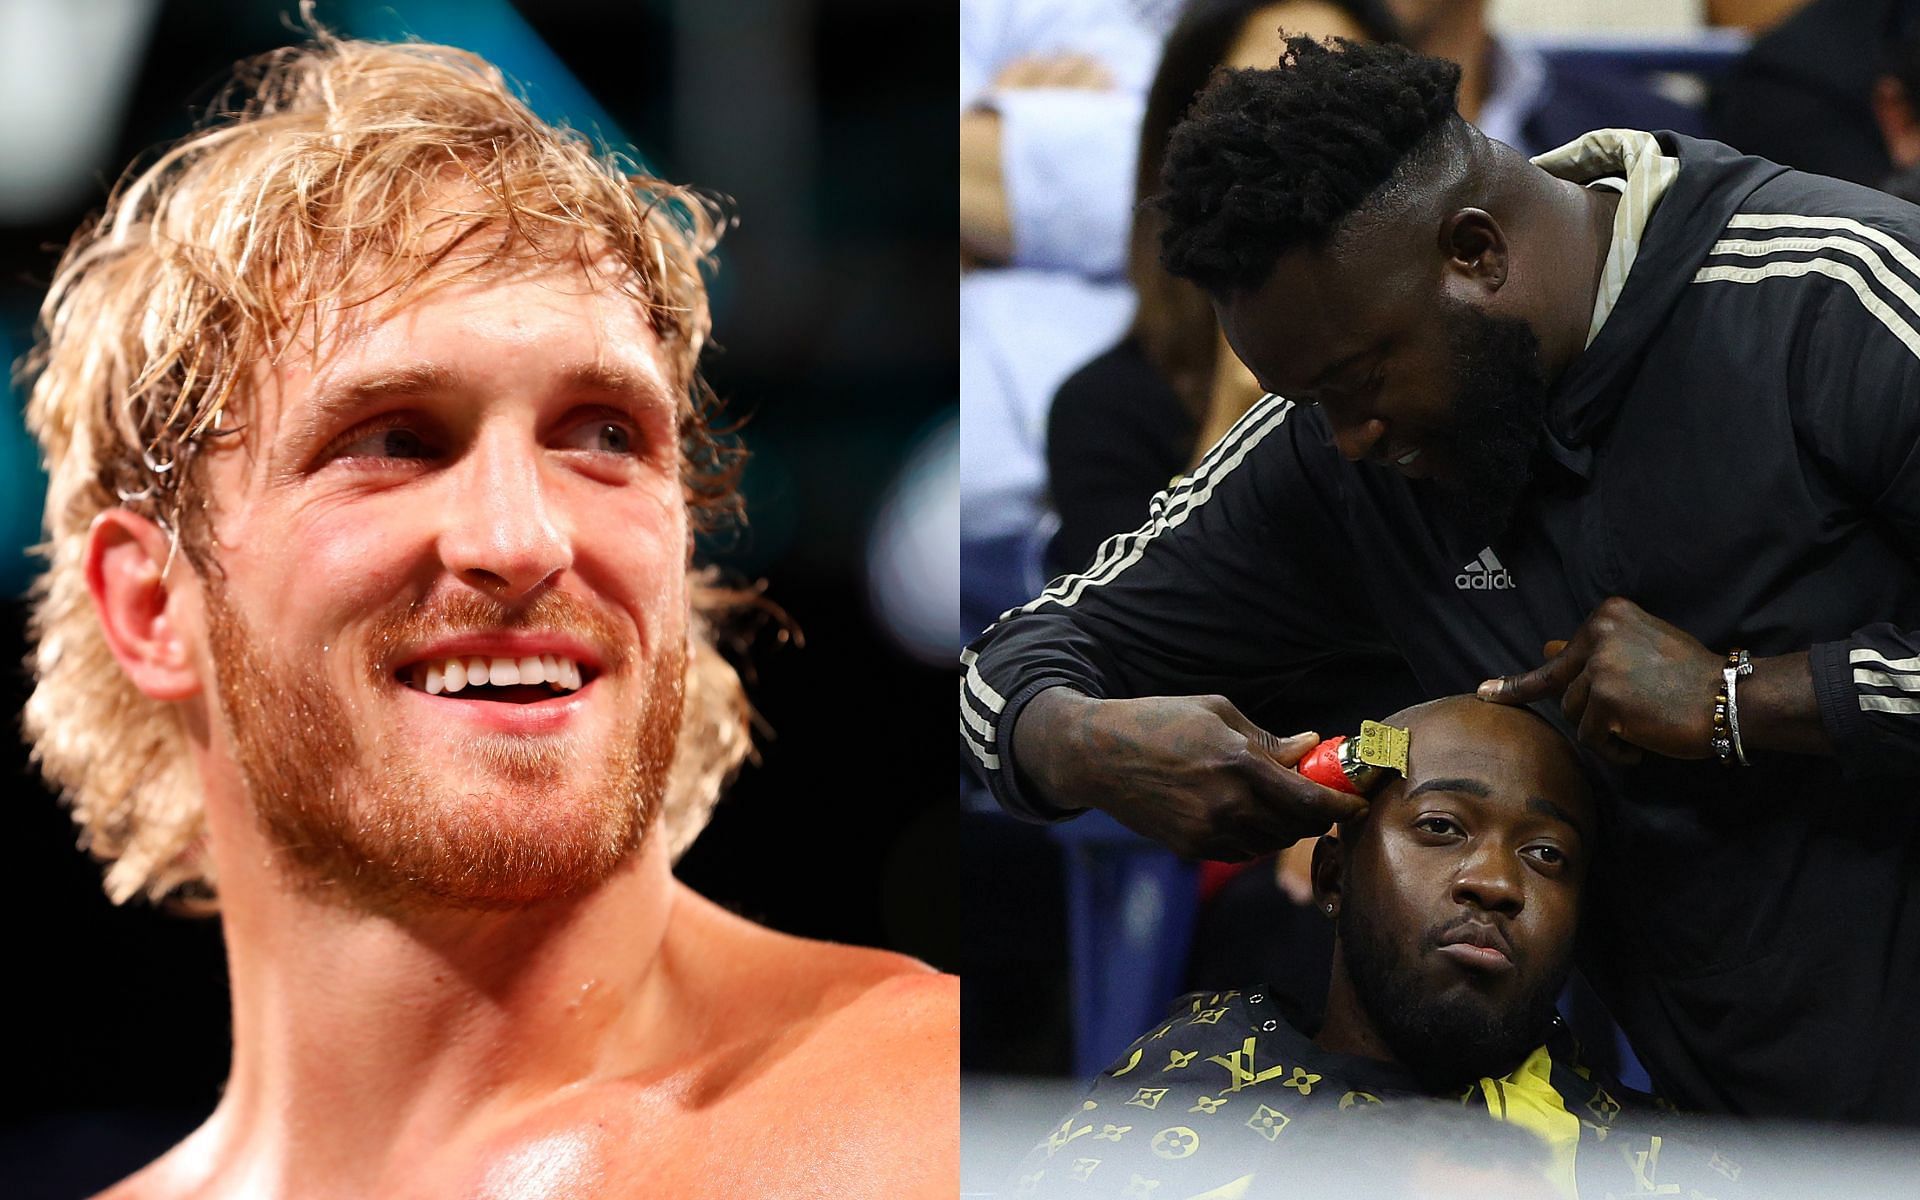 Logan Paul (left) and JiDion getting a haircut at the US Open (right) (Image credits Getty Images)